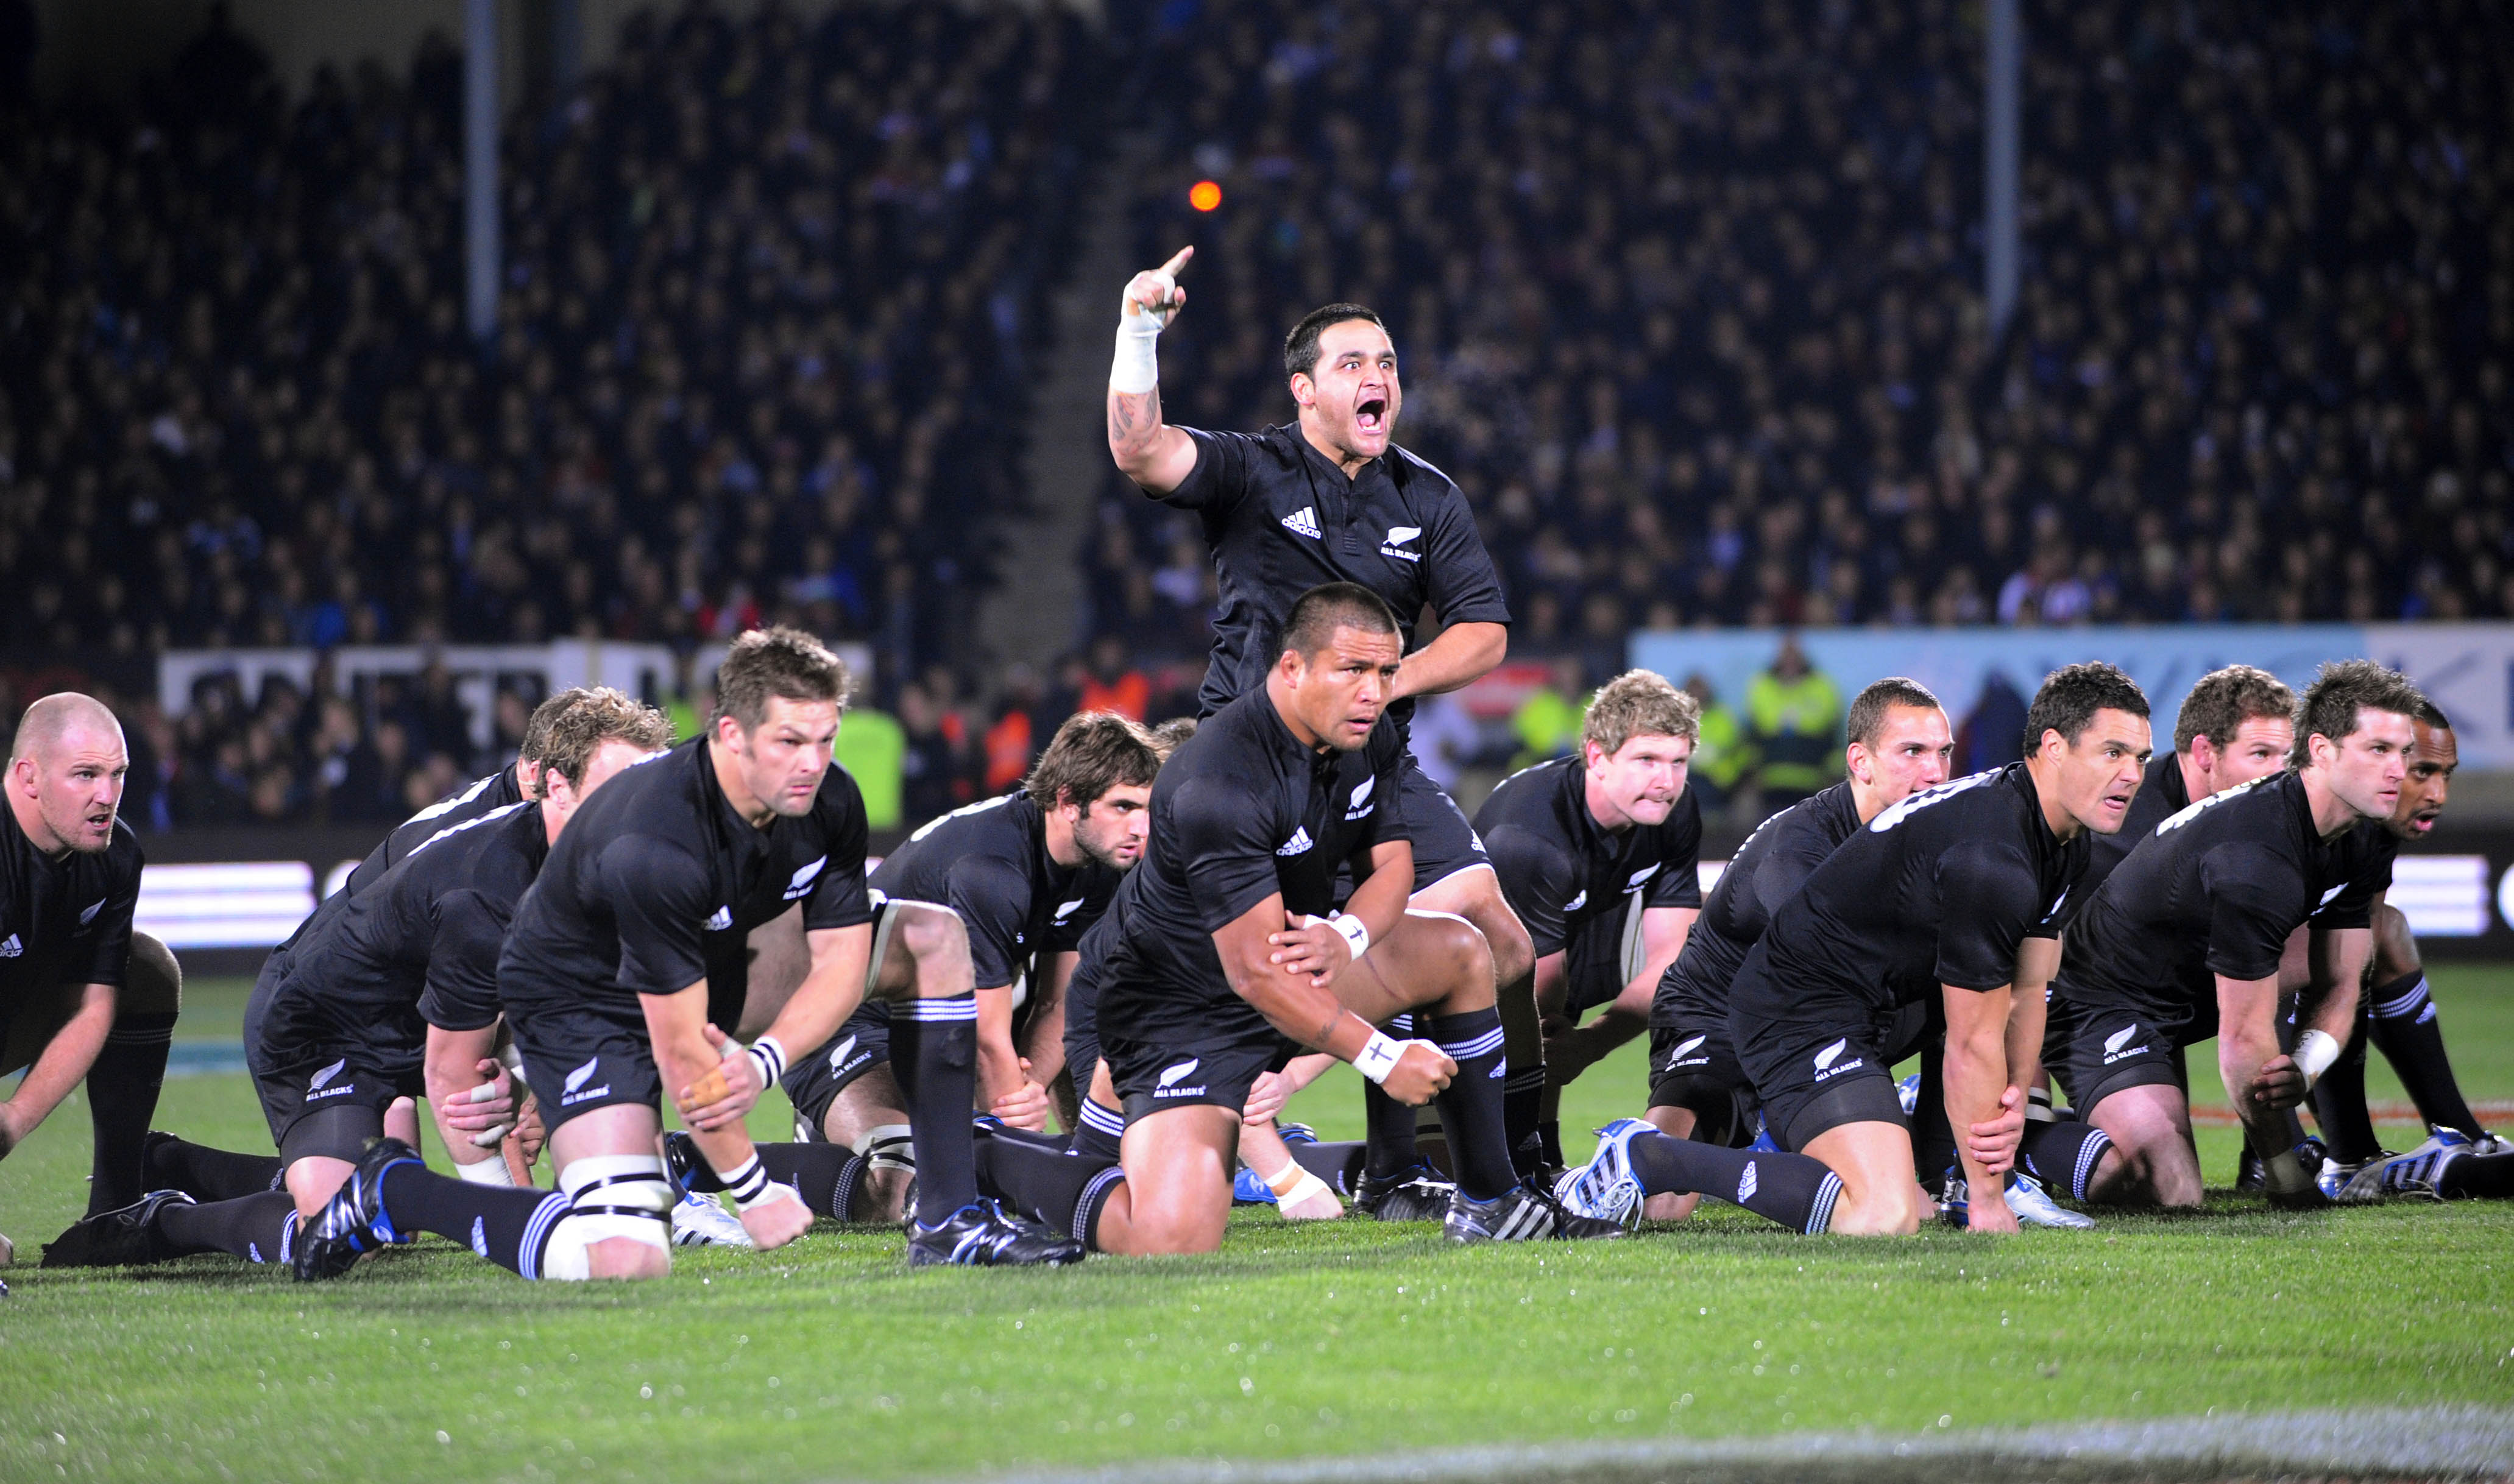 The New Zealand Haka, a traditional pre-game war dance. A spectacle that was until now, unanswered